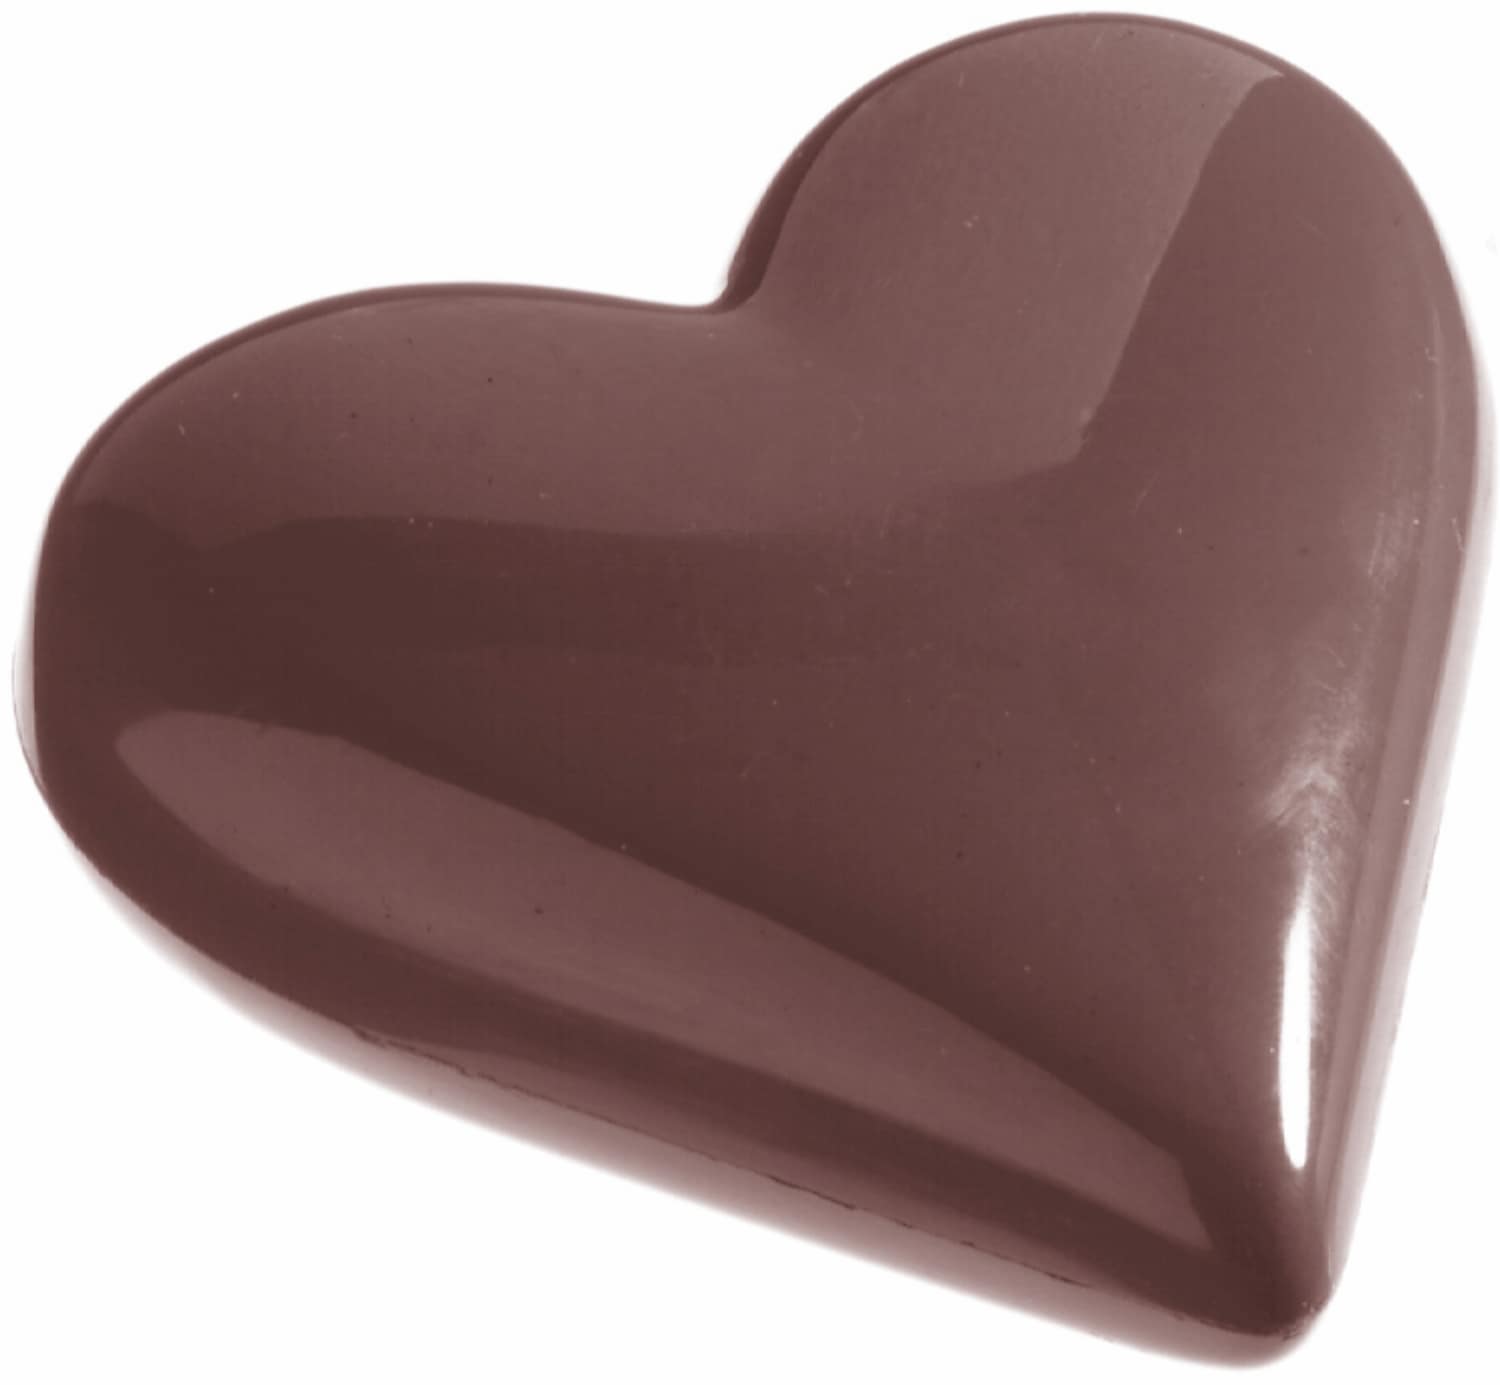 Chocolate mould "heart" 421148